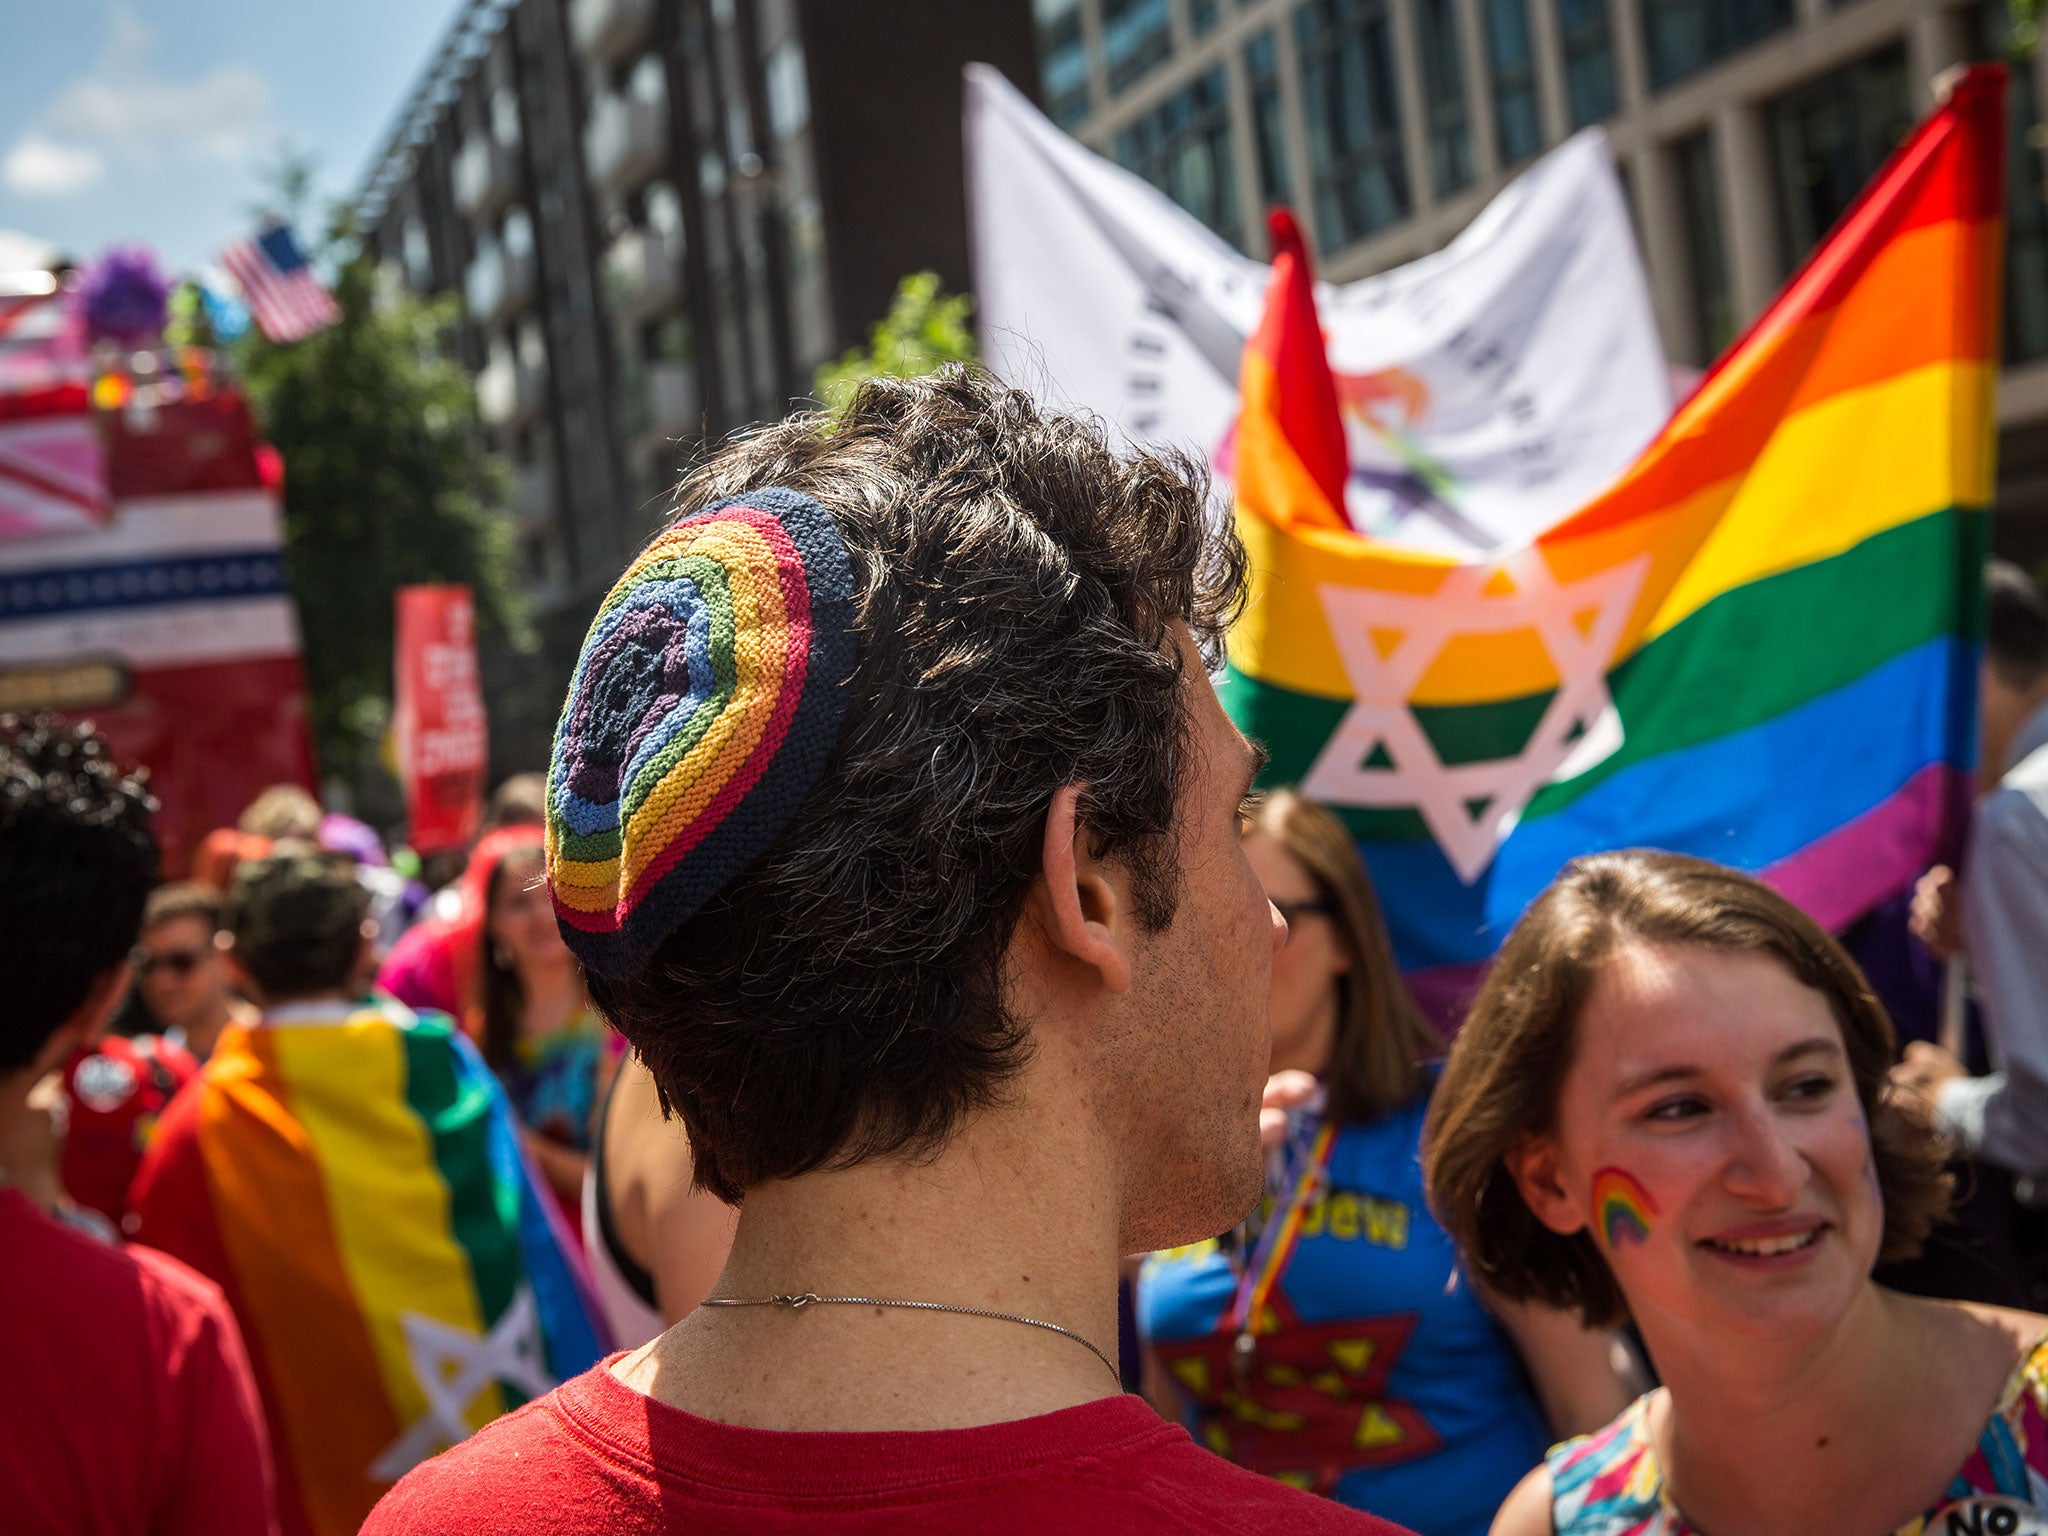 This year’s Pride was a first for some, including Ukip’s LGBT group. The group joined the march – to cheers and jeers – despite being banned after campaigners, including the human rights activist Peter Tatchell, criticised its inclusion